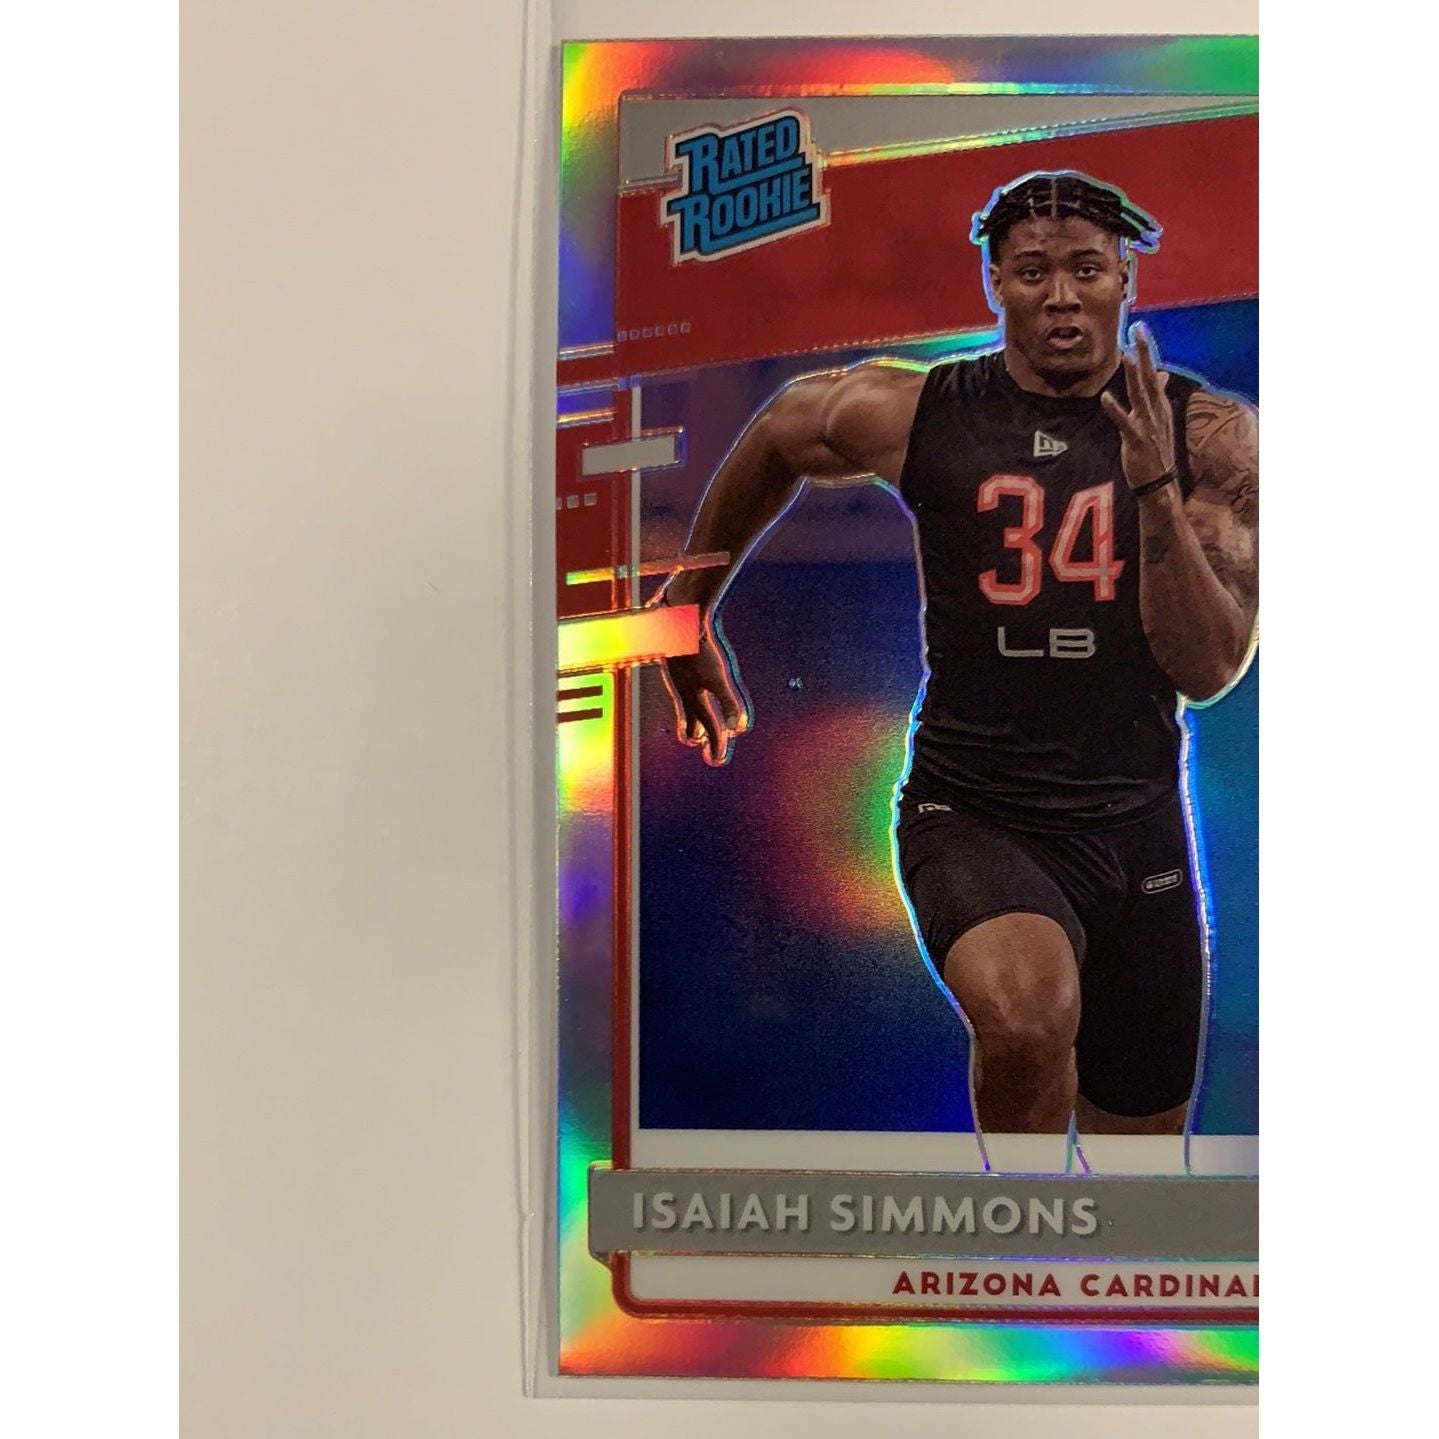  2020 Donruss Optic Isaiah Simmons Rated Rookie Prizm  Local Legends Cards & Collectibles